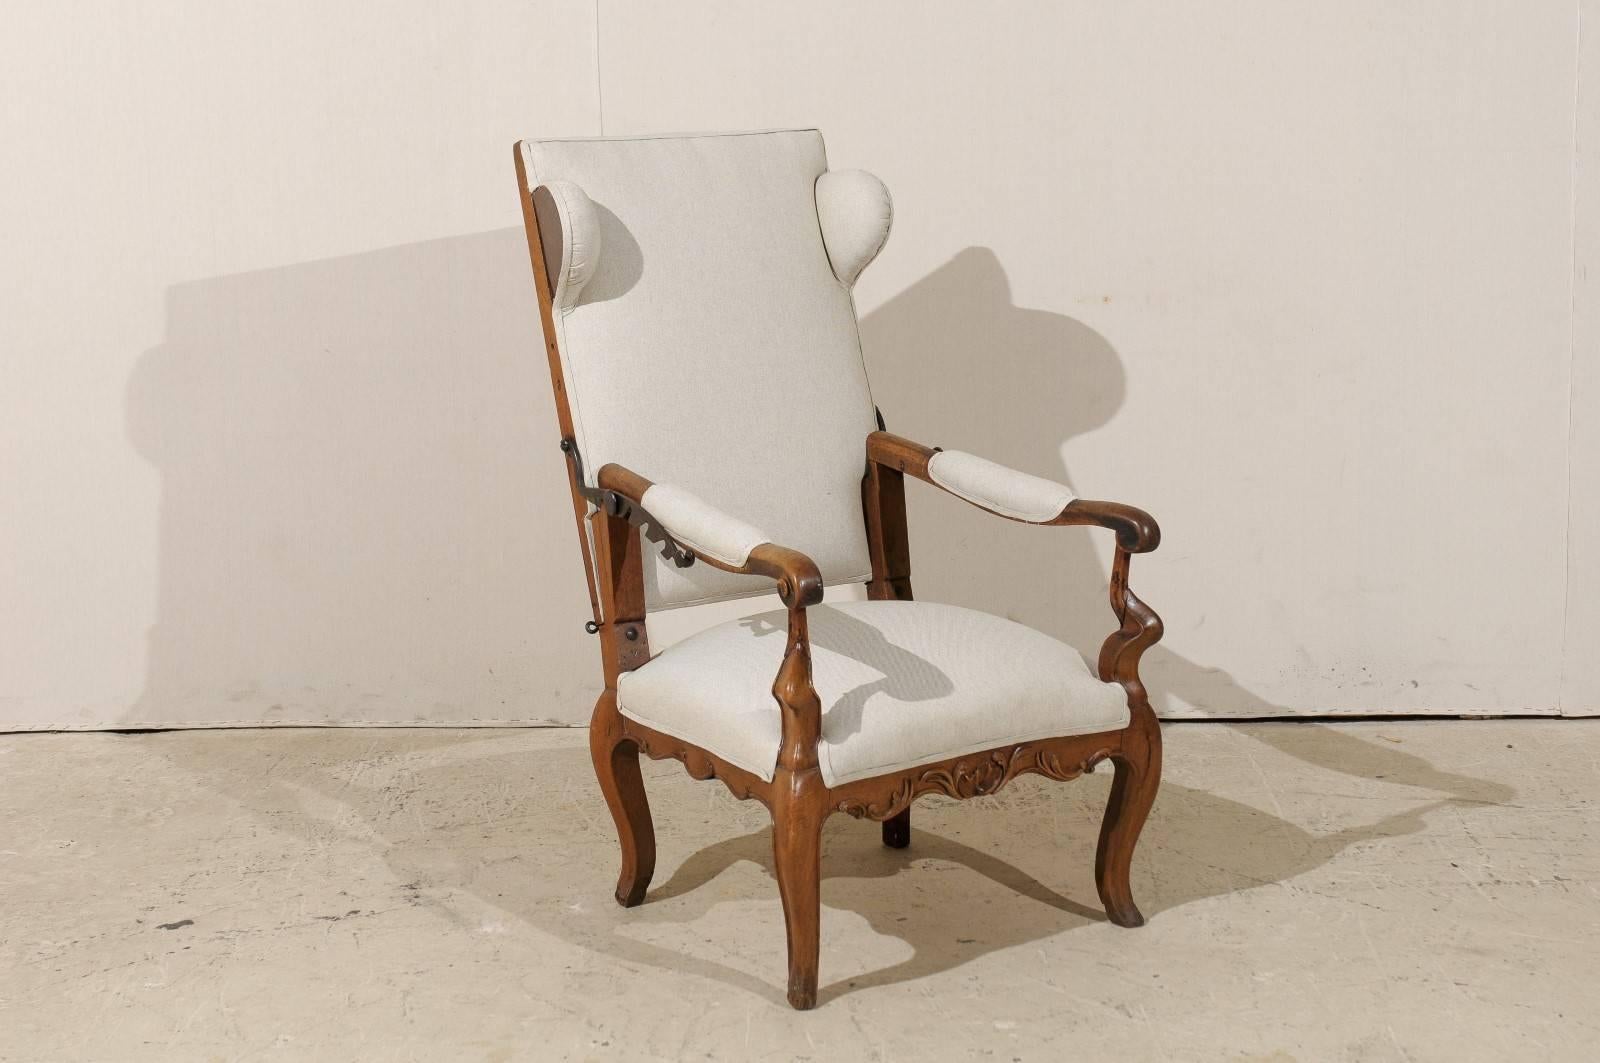 A wooden 18th century Italian reclining armchair. This unique Italian armchair features a reclining back with head rests at either side. The arms are upholstered and feature carved wood scrolled knuckles. This Italian armchair also features an